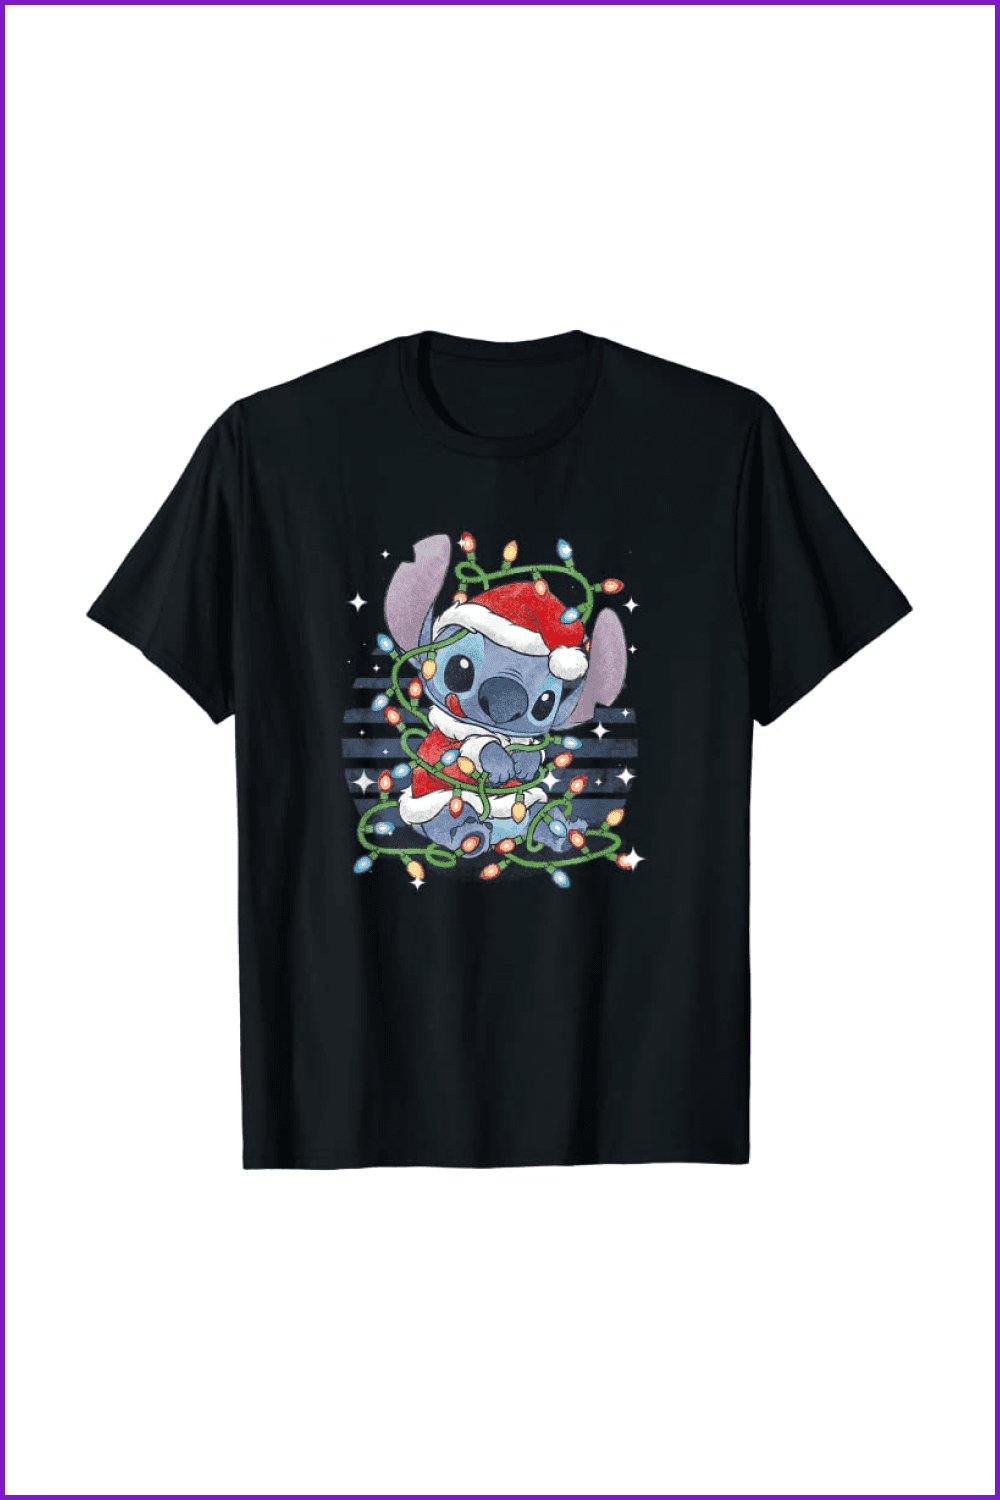 T-shirt with Stitch in a Santa Claus suit covered with colorful lights.